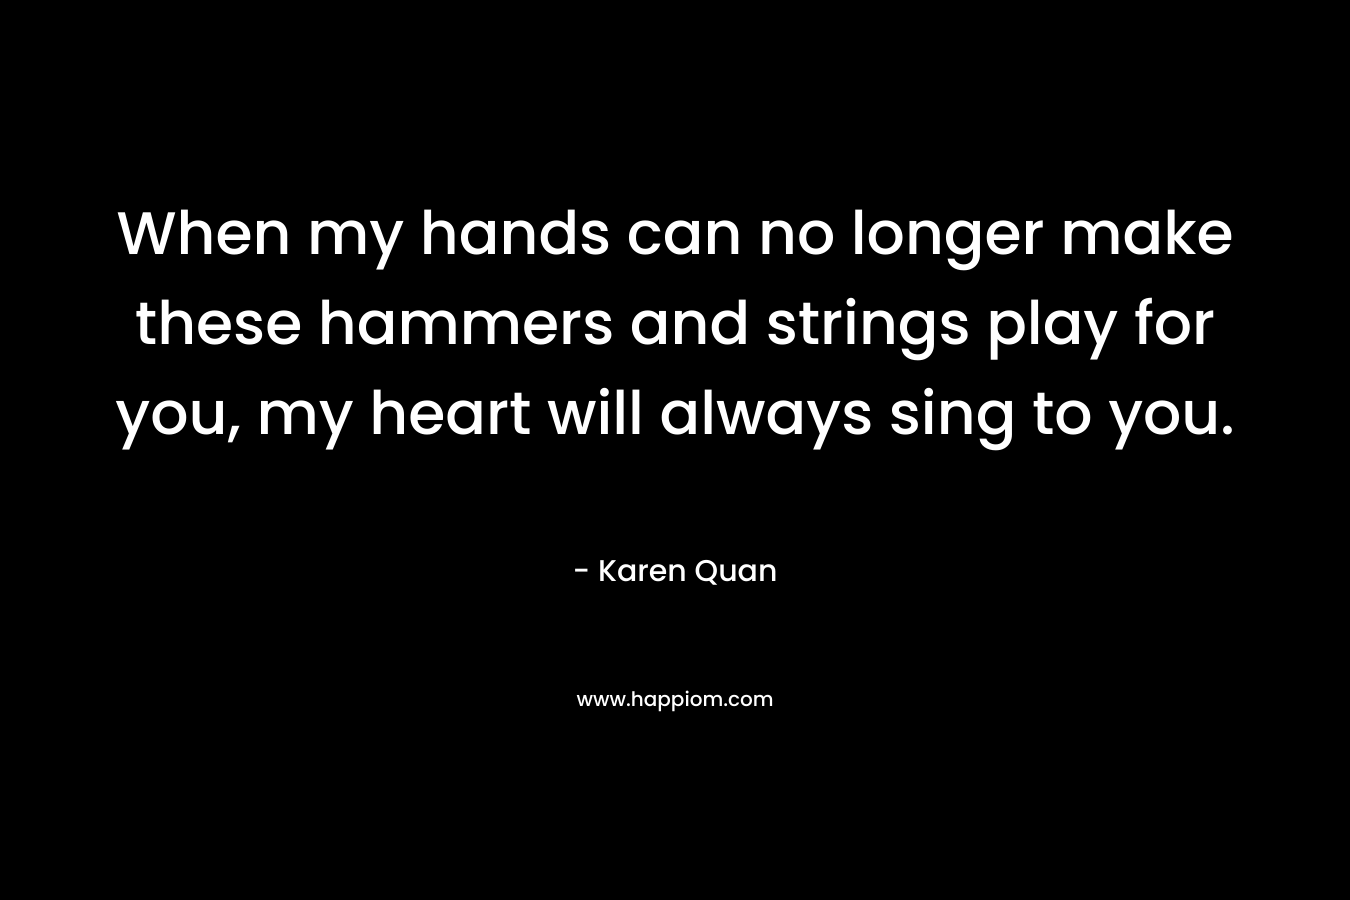 When my hands can no longer make these hammers and strings play for you, my heart will always sing to you.